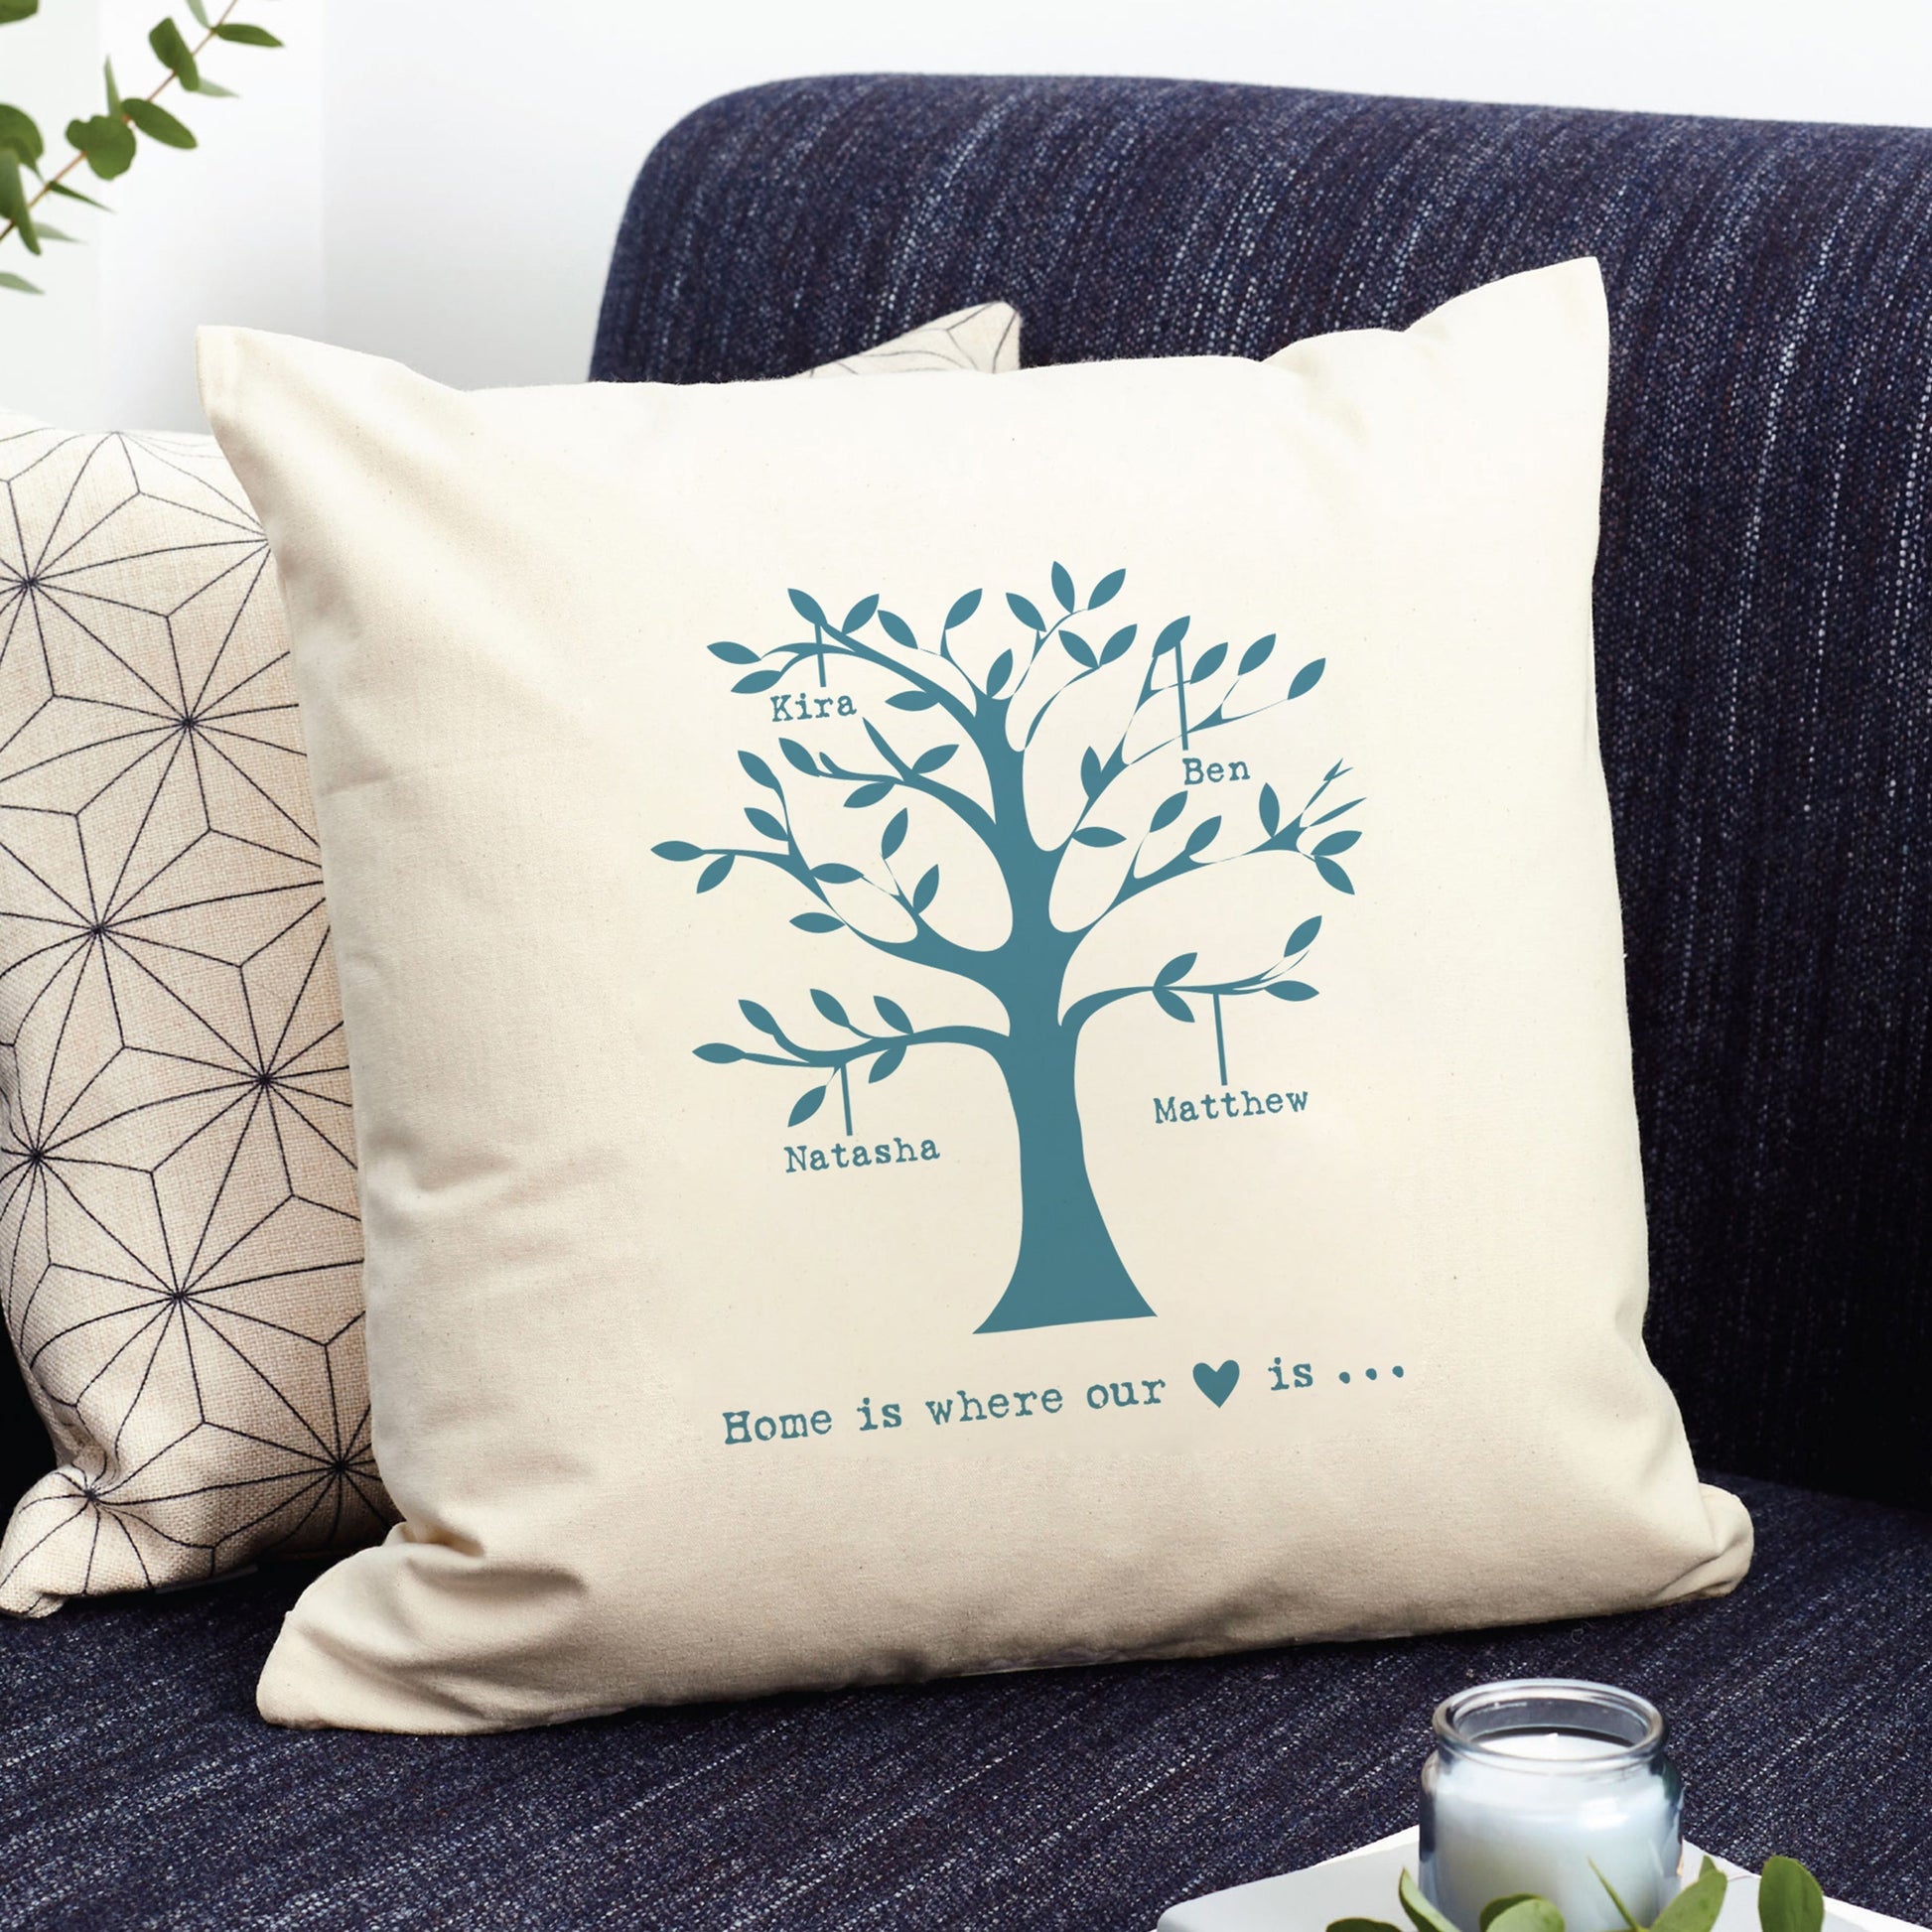 Personalized Cushion Covers - Personalized Family Tree Cushion Cover 